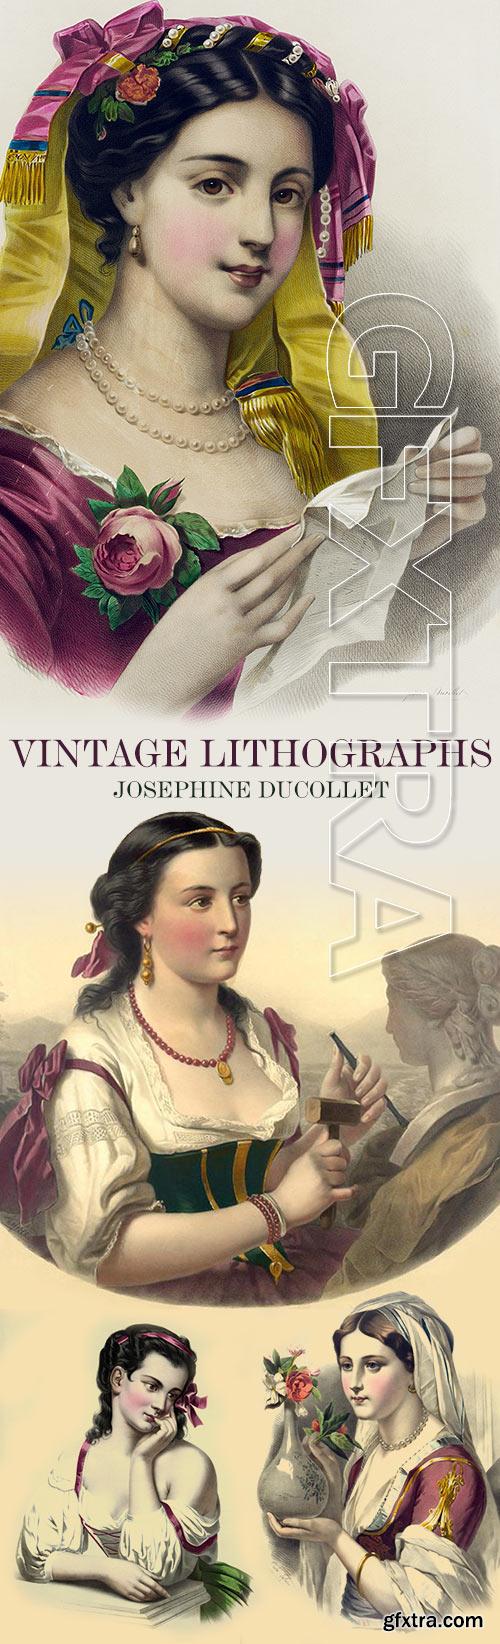 Vintage Lithographs - Josephine Ducollet 12xJPG